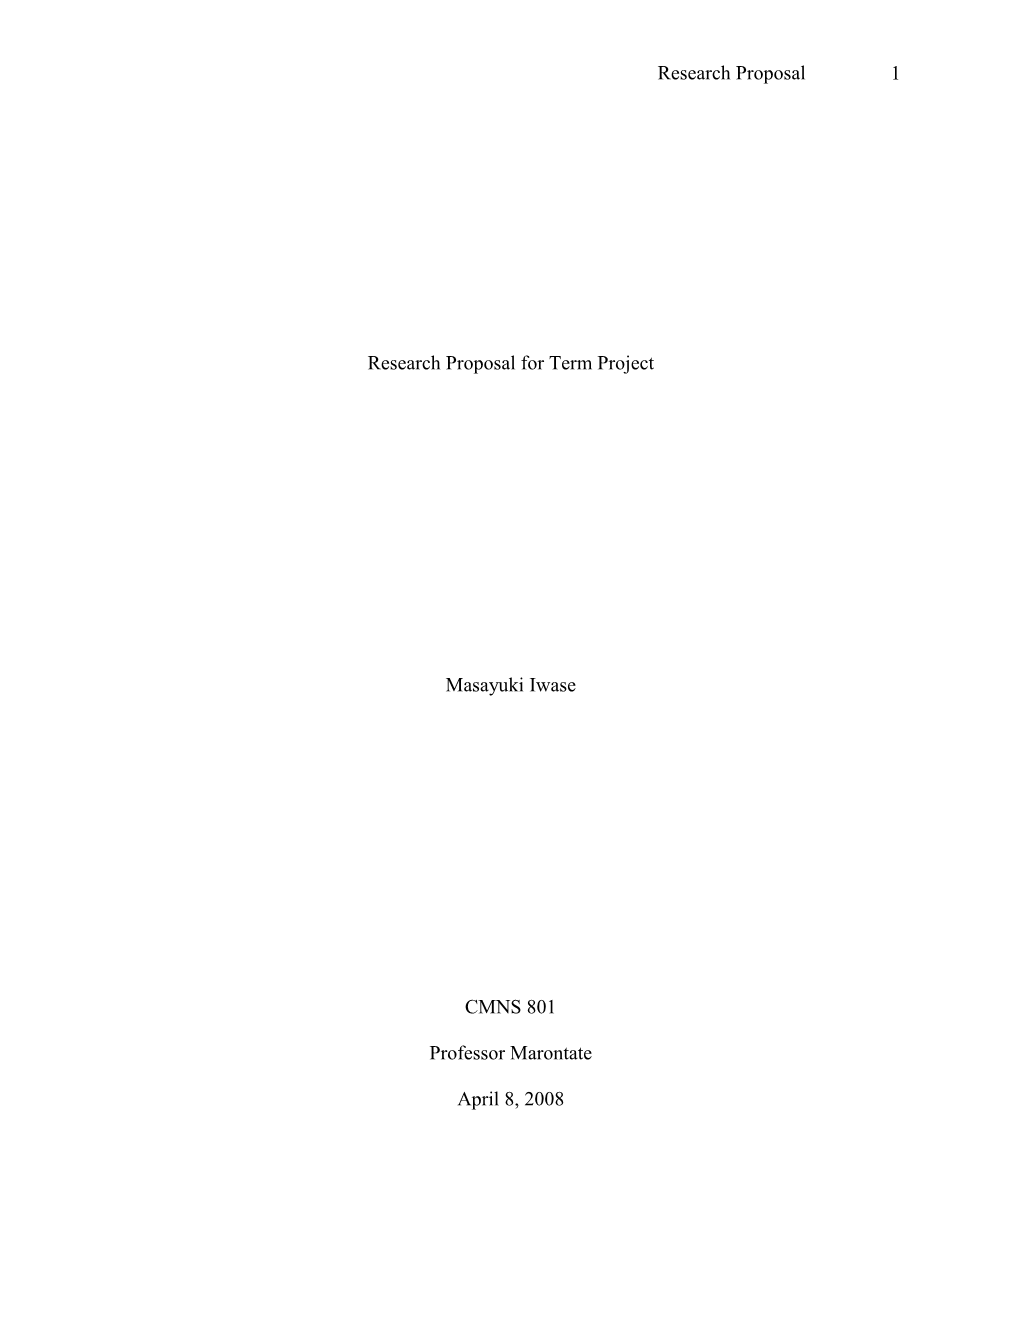 Research Proposal for Term Project